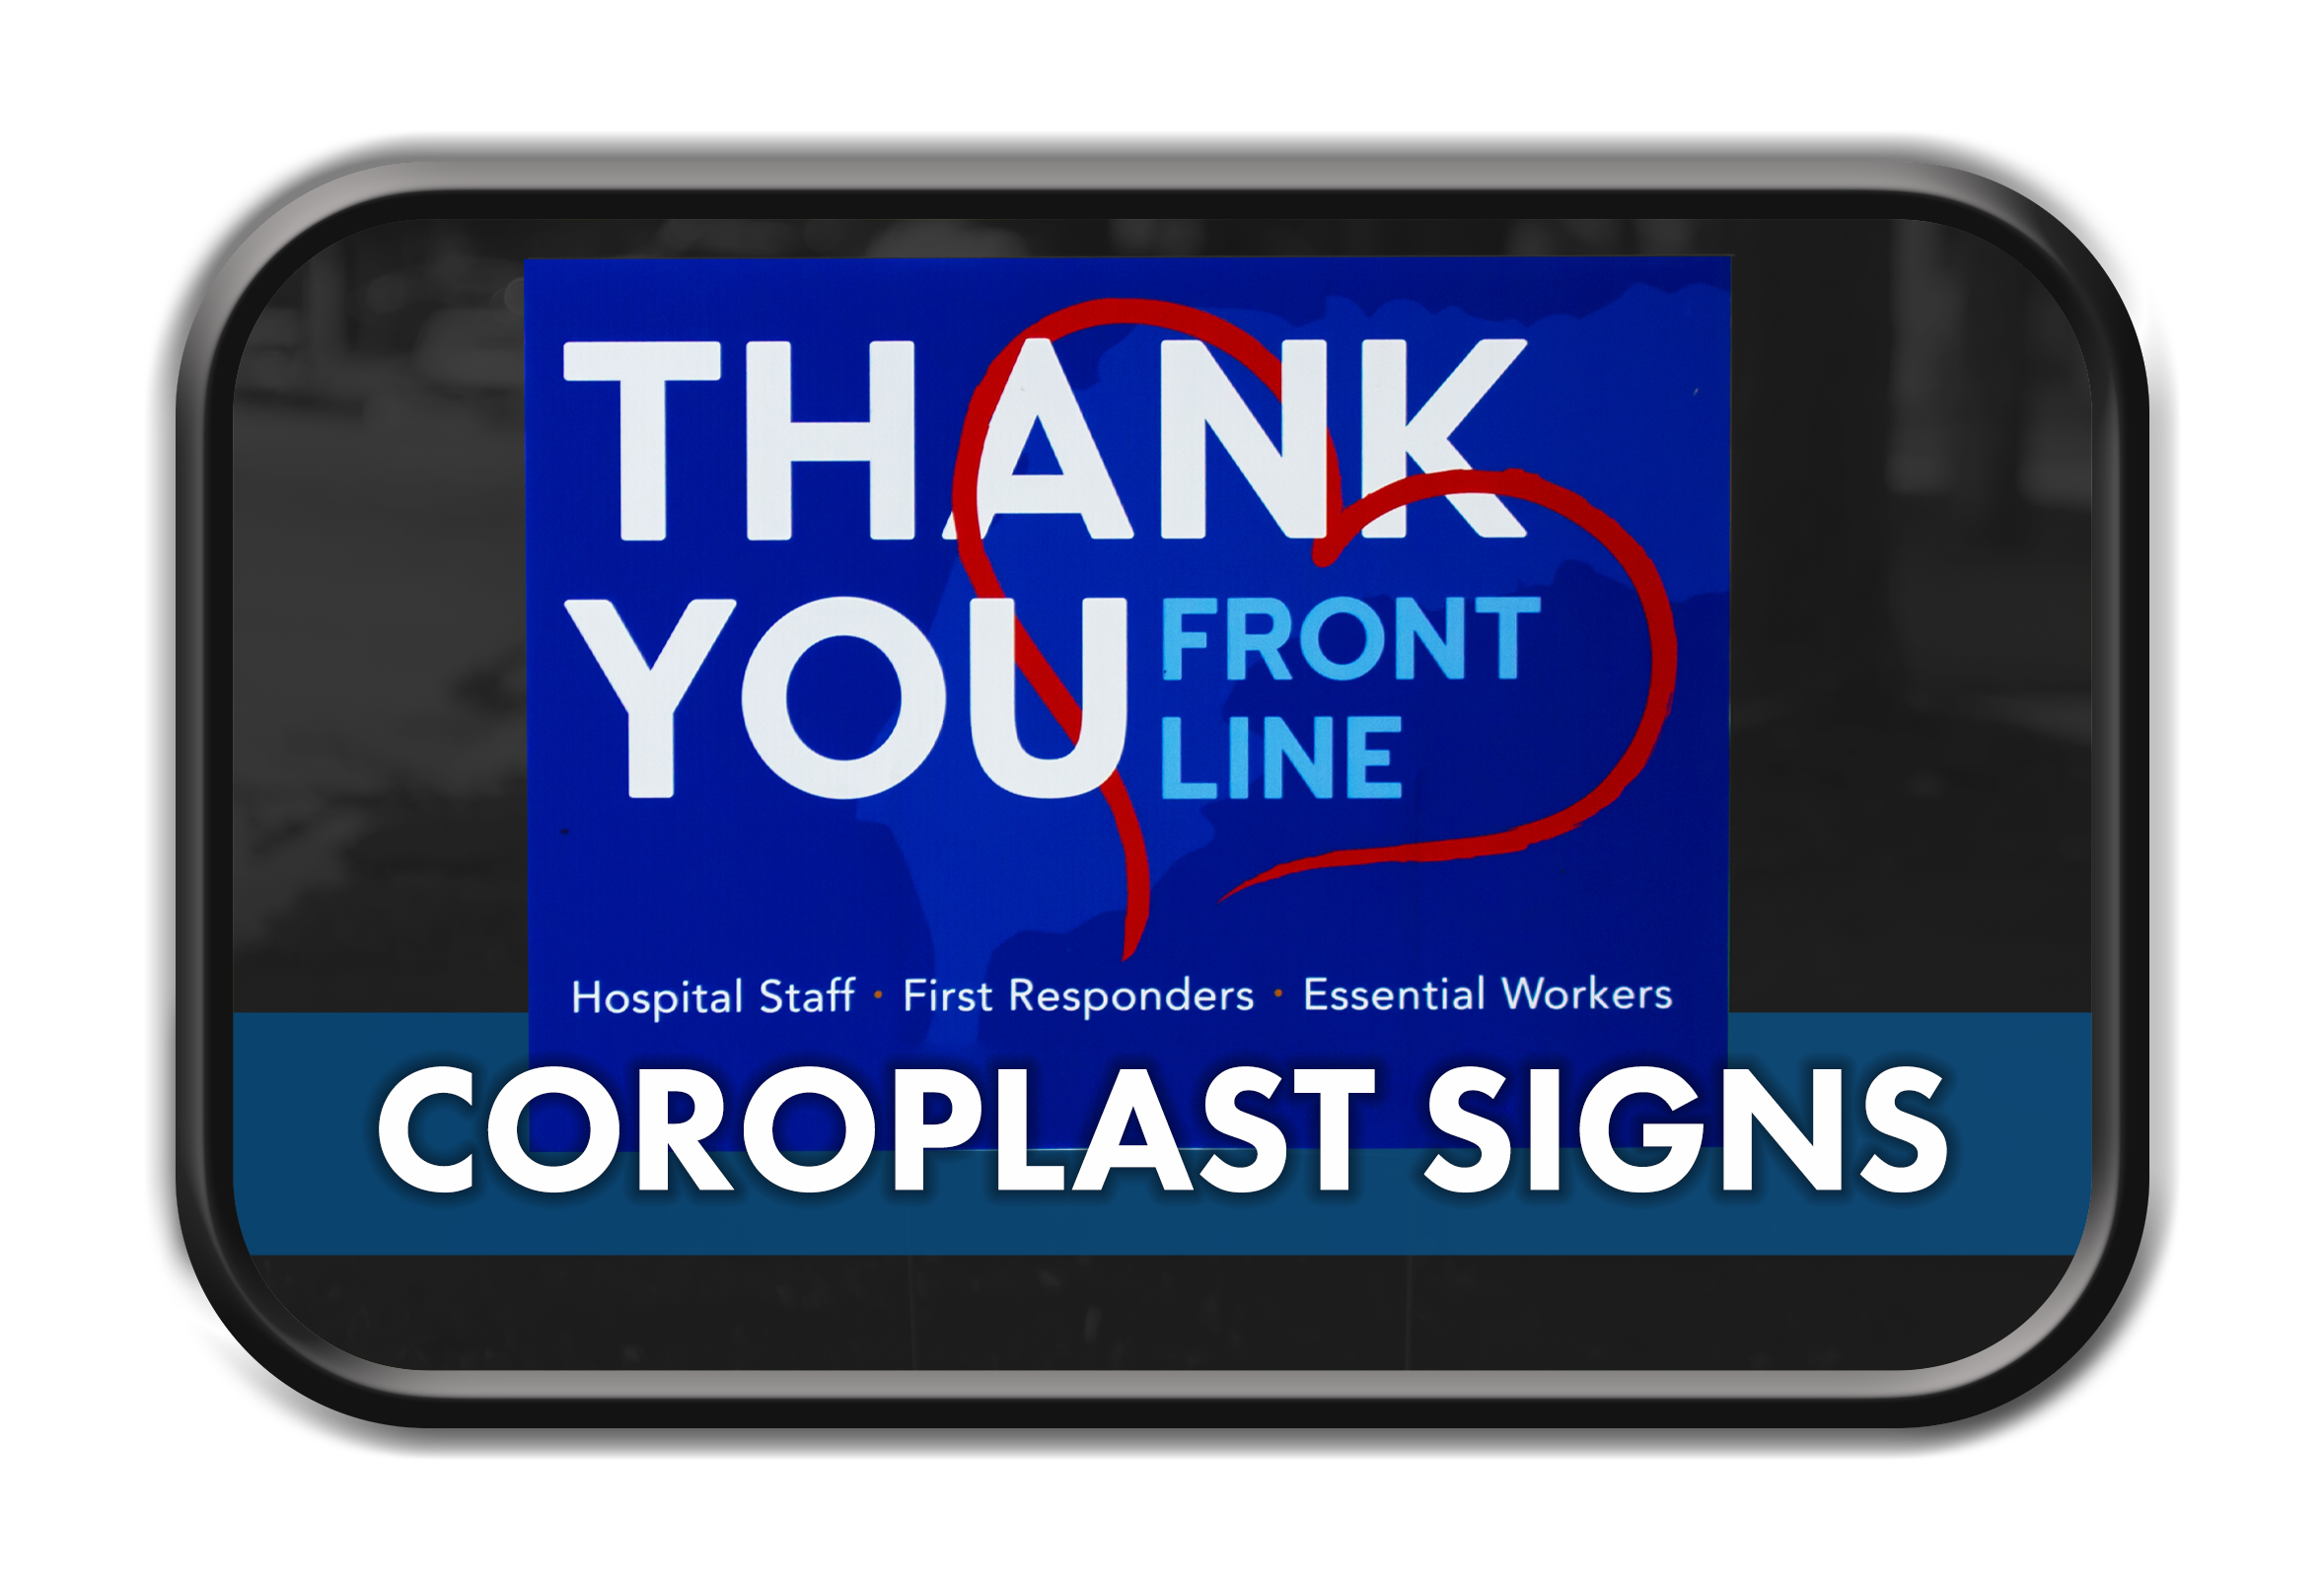 COROPLAST SIGNS-ALSOCHECKOUT.png